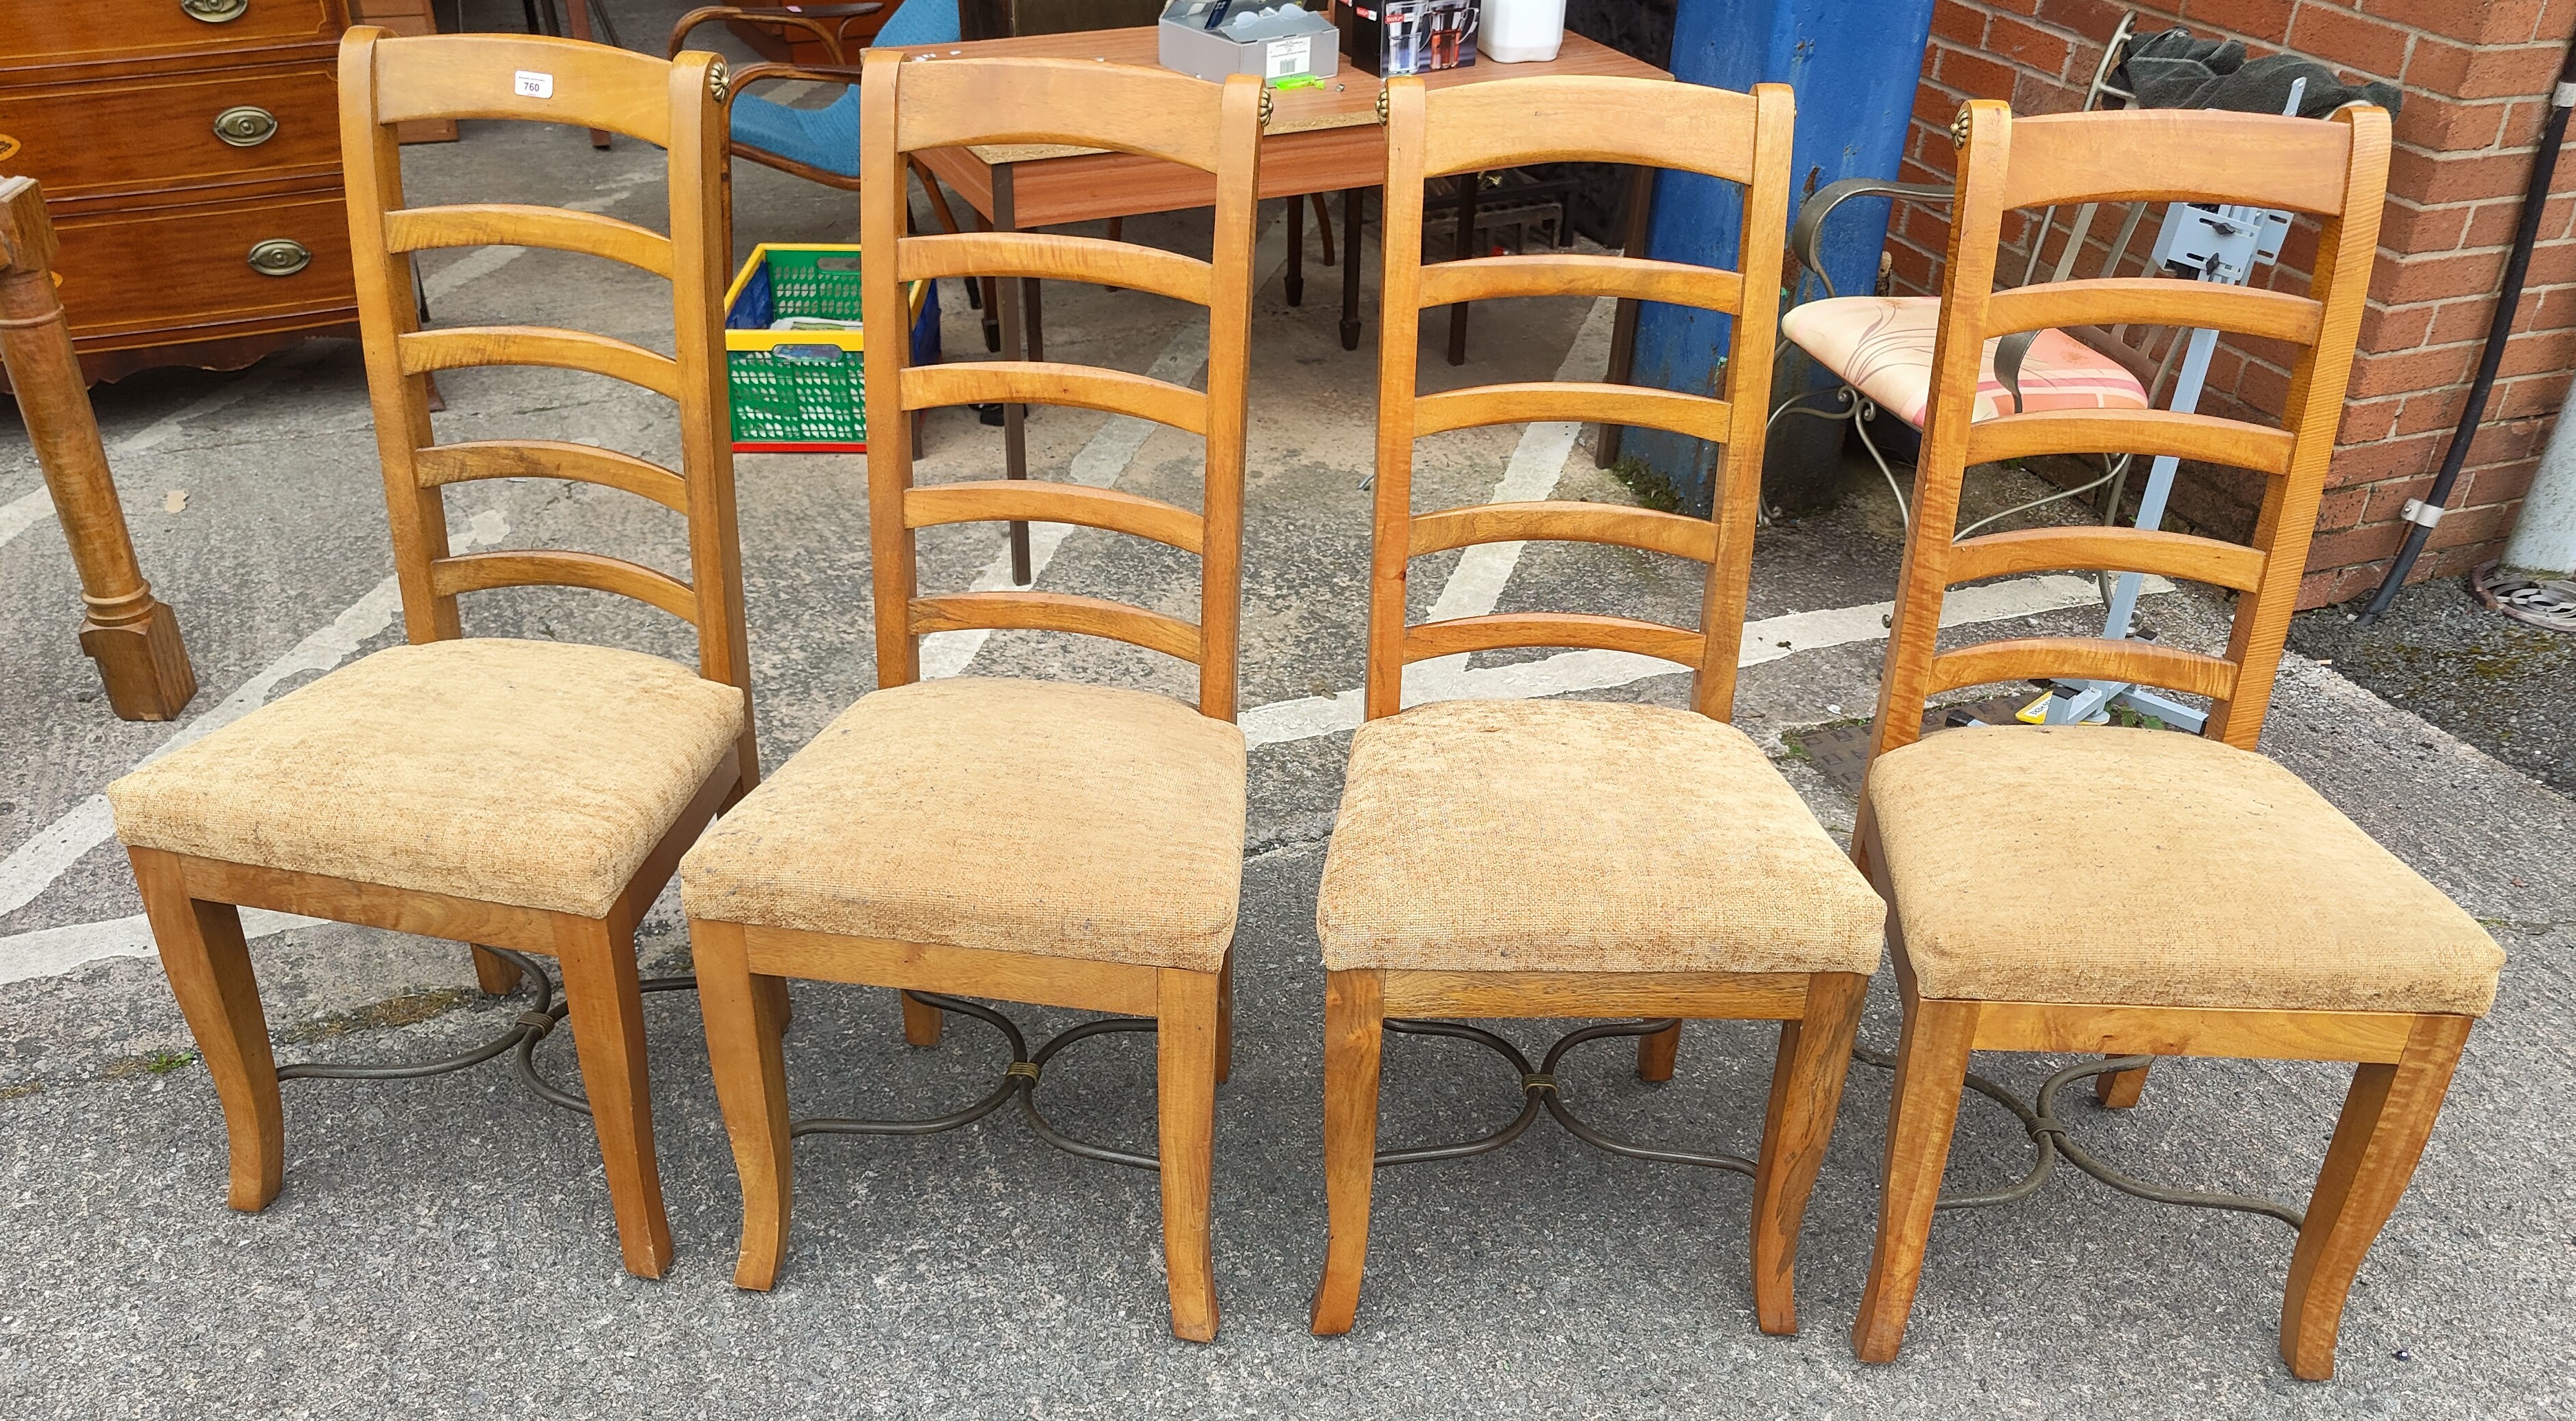 A modern lightwood set of four chairs.